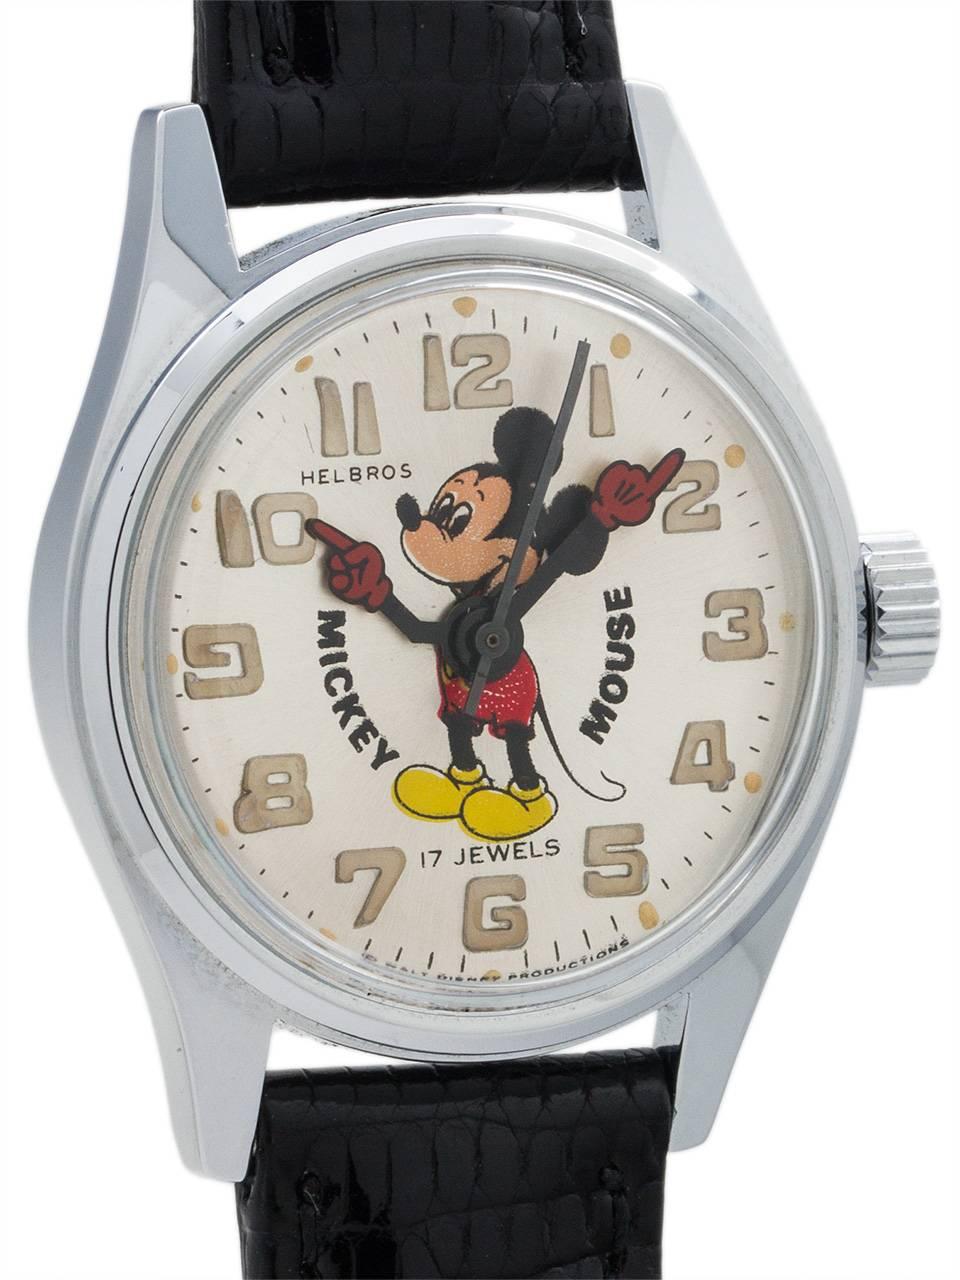 
Vintage medium size Helbros 17 jewel manual wind Mickey Mouse watch circa 1970’s. Featuring 31mm diameter chromium plated case with steel screw down back, with acrylic crystal, and with excellent condition original dial with polychrome depiction of